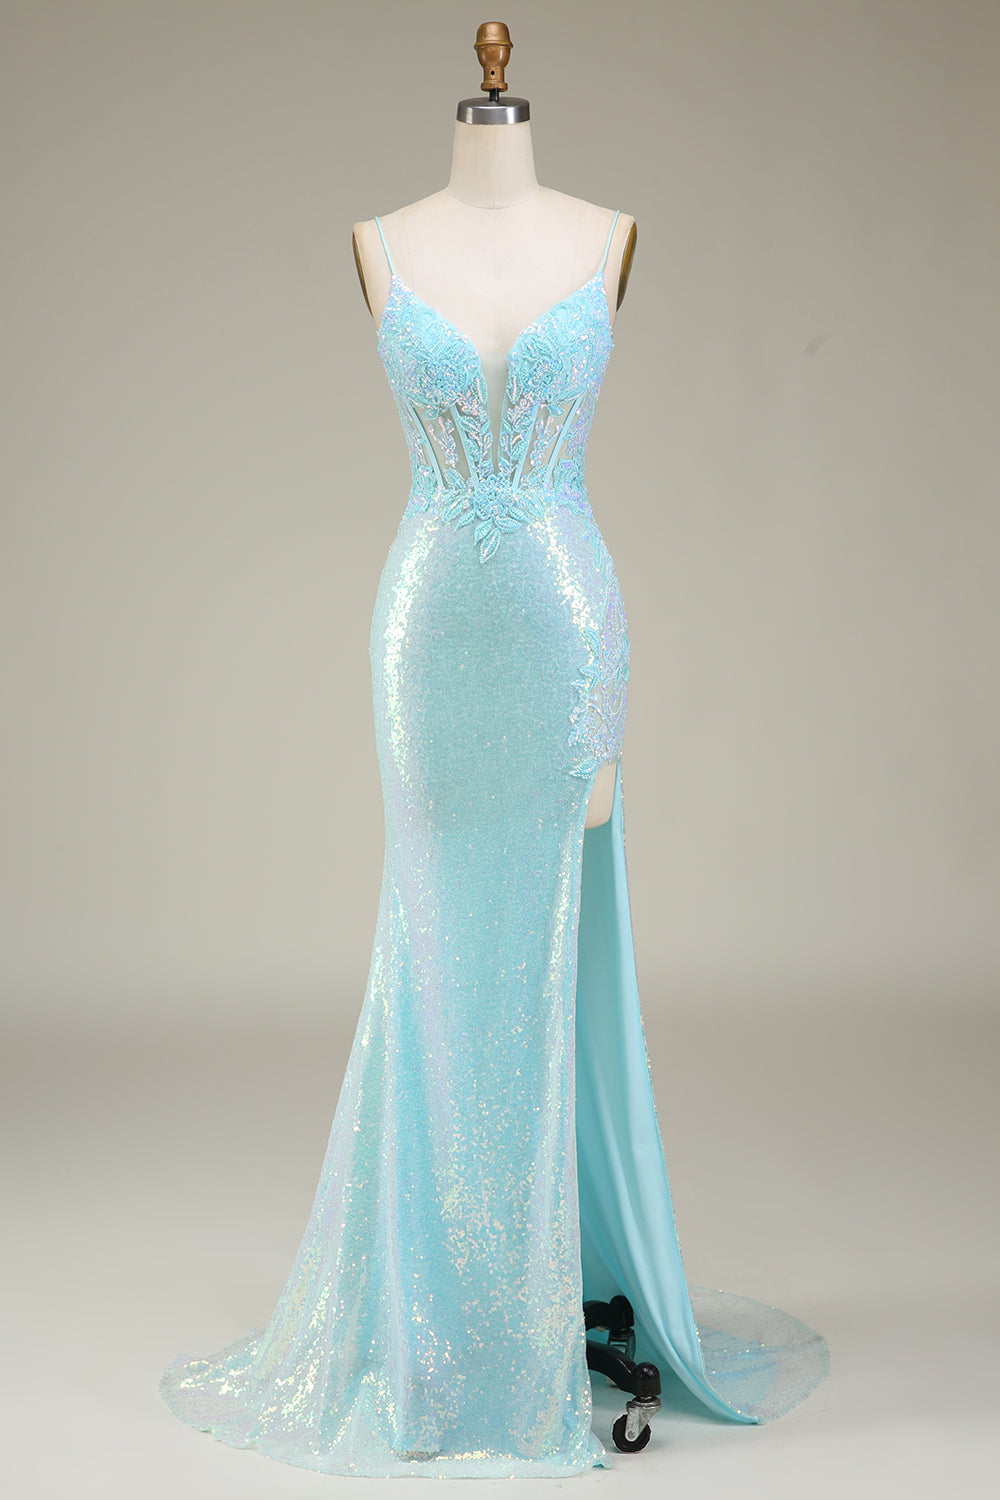 Ethereal Prom Dress, Sparkly Mermaid Spaghetti Straps Light Blue Prom Dress with Slit